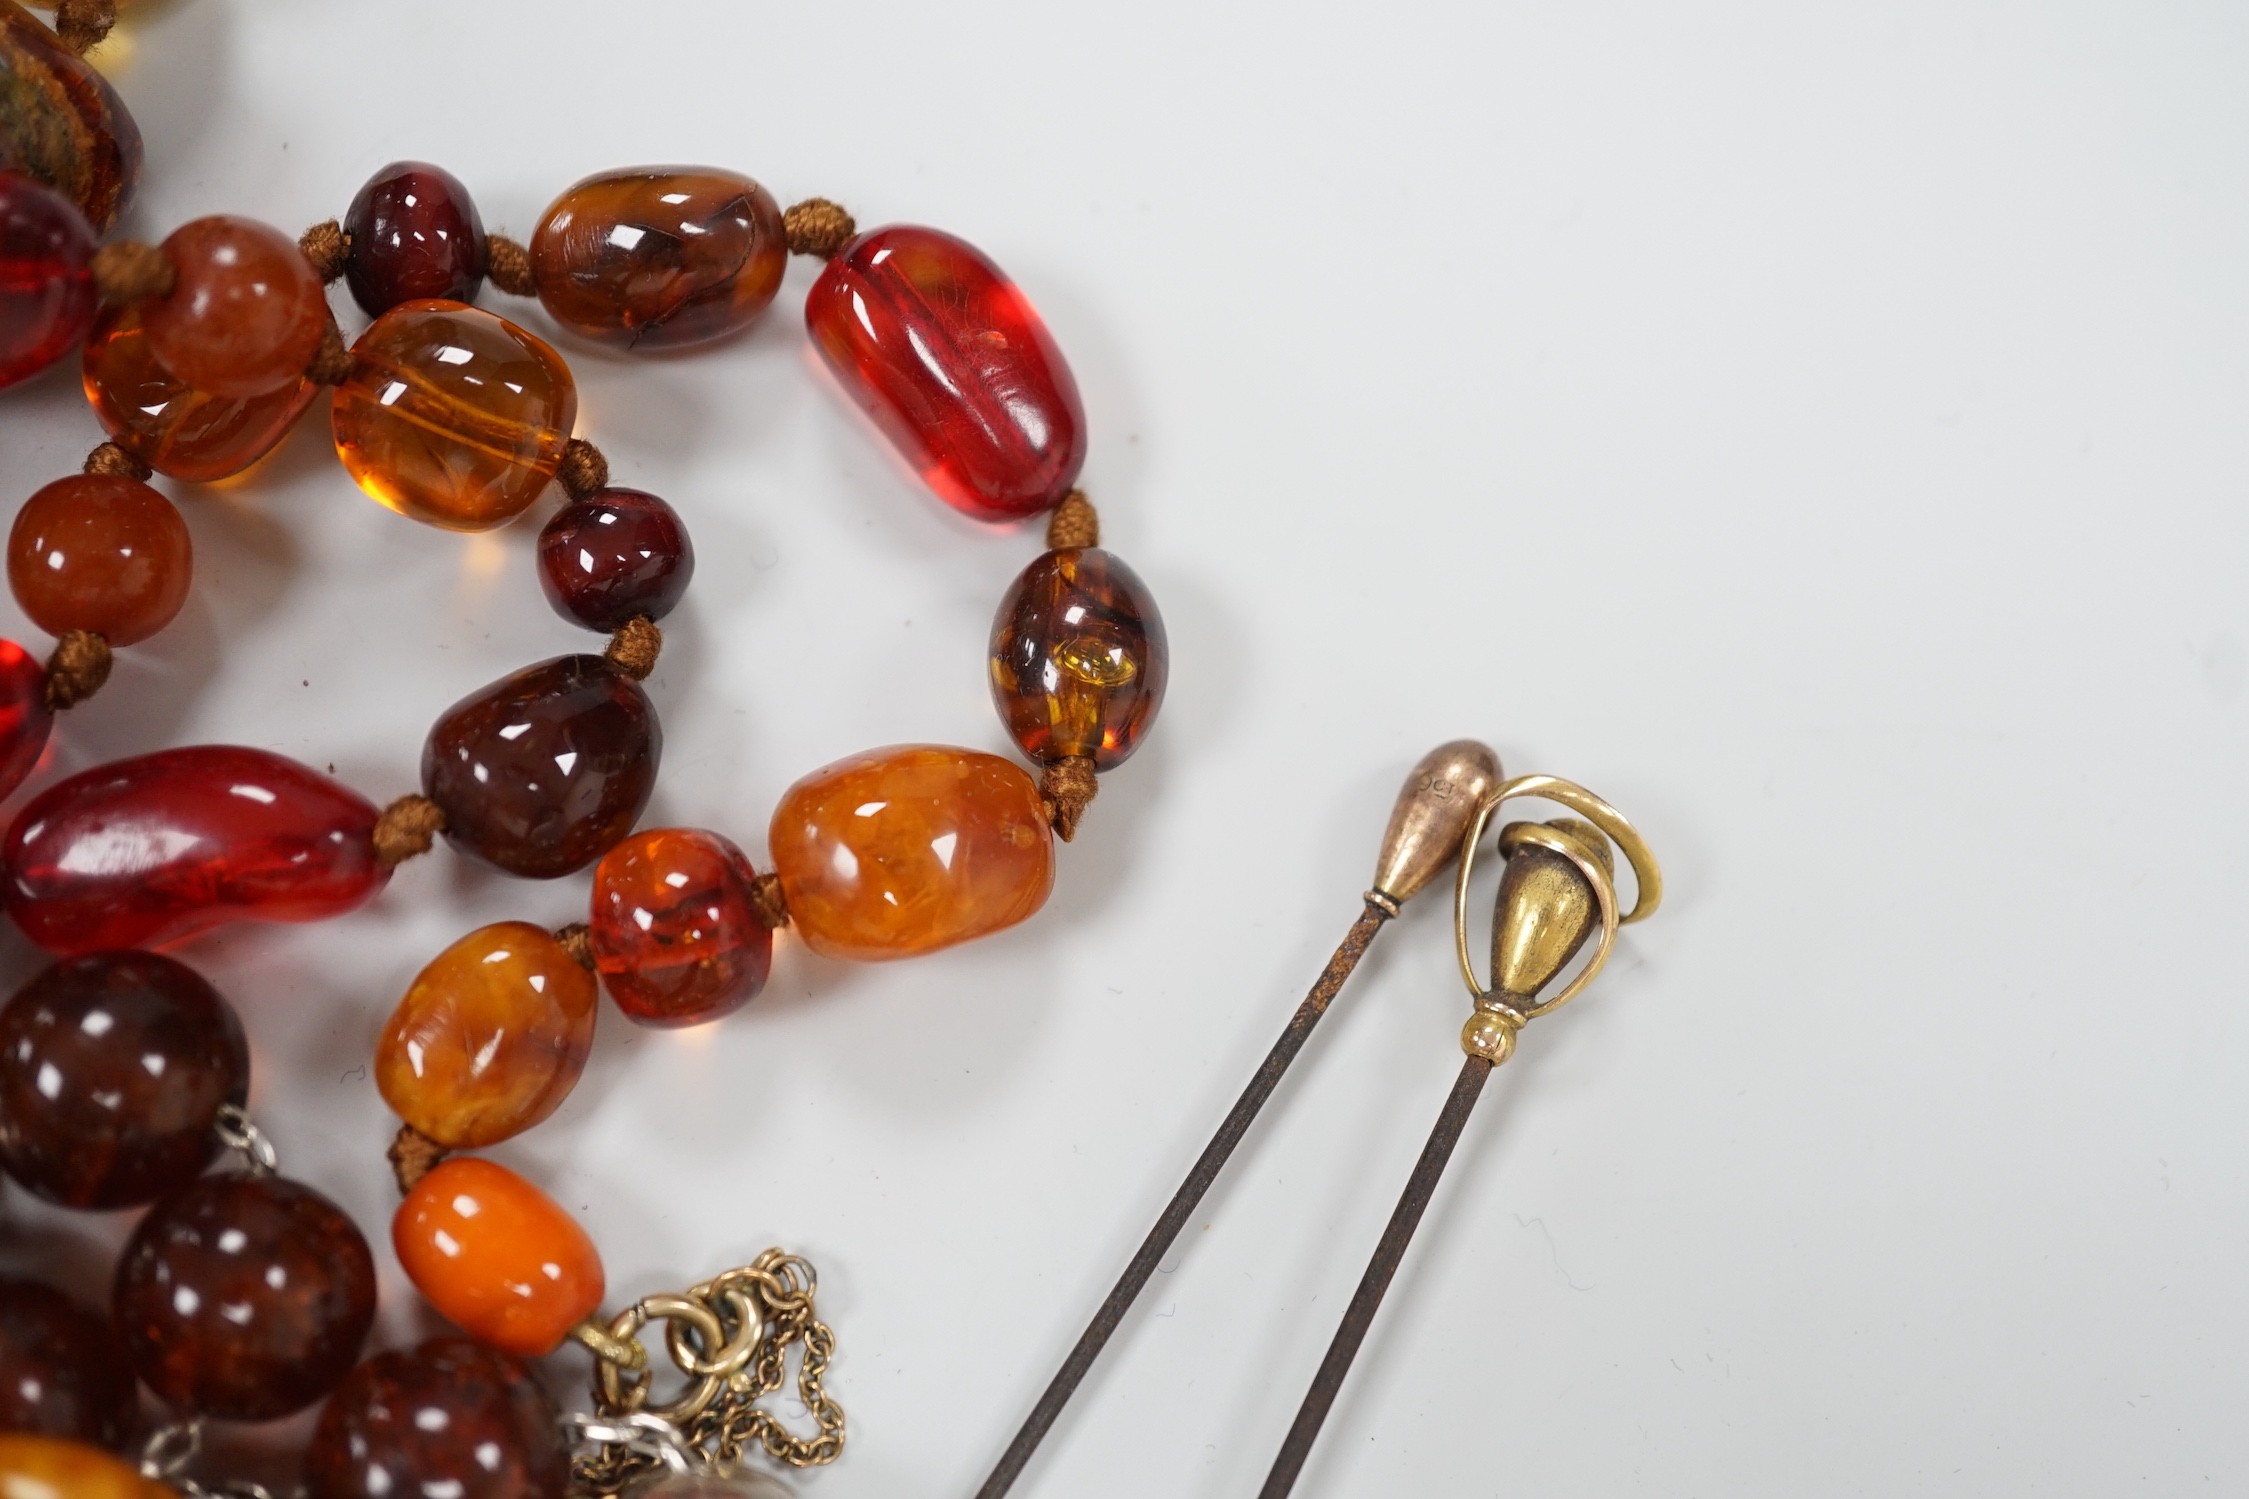 An early 20th century 9ct gold mounted hat pin by Charles Horner, 16cm one other 9ct mounted hat pin, a Margaret Haskell brooch and bracelet and three other items including amber necklace.